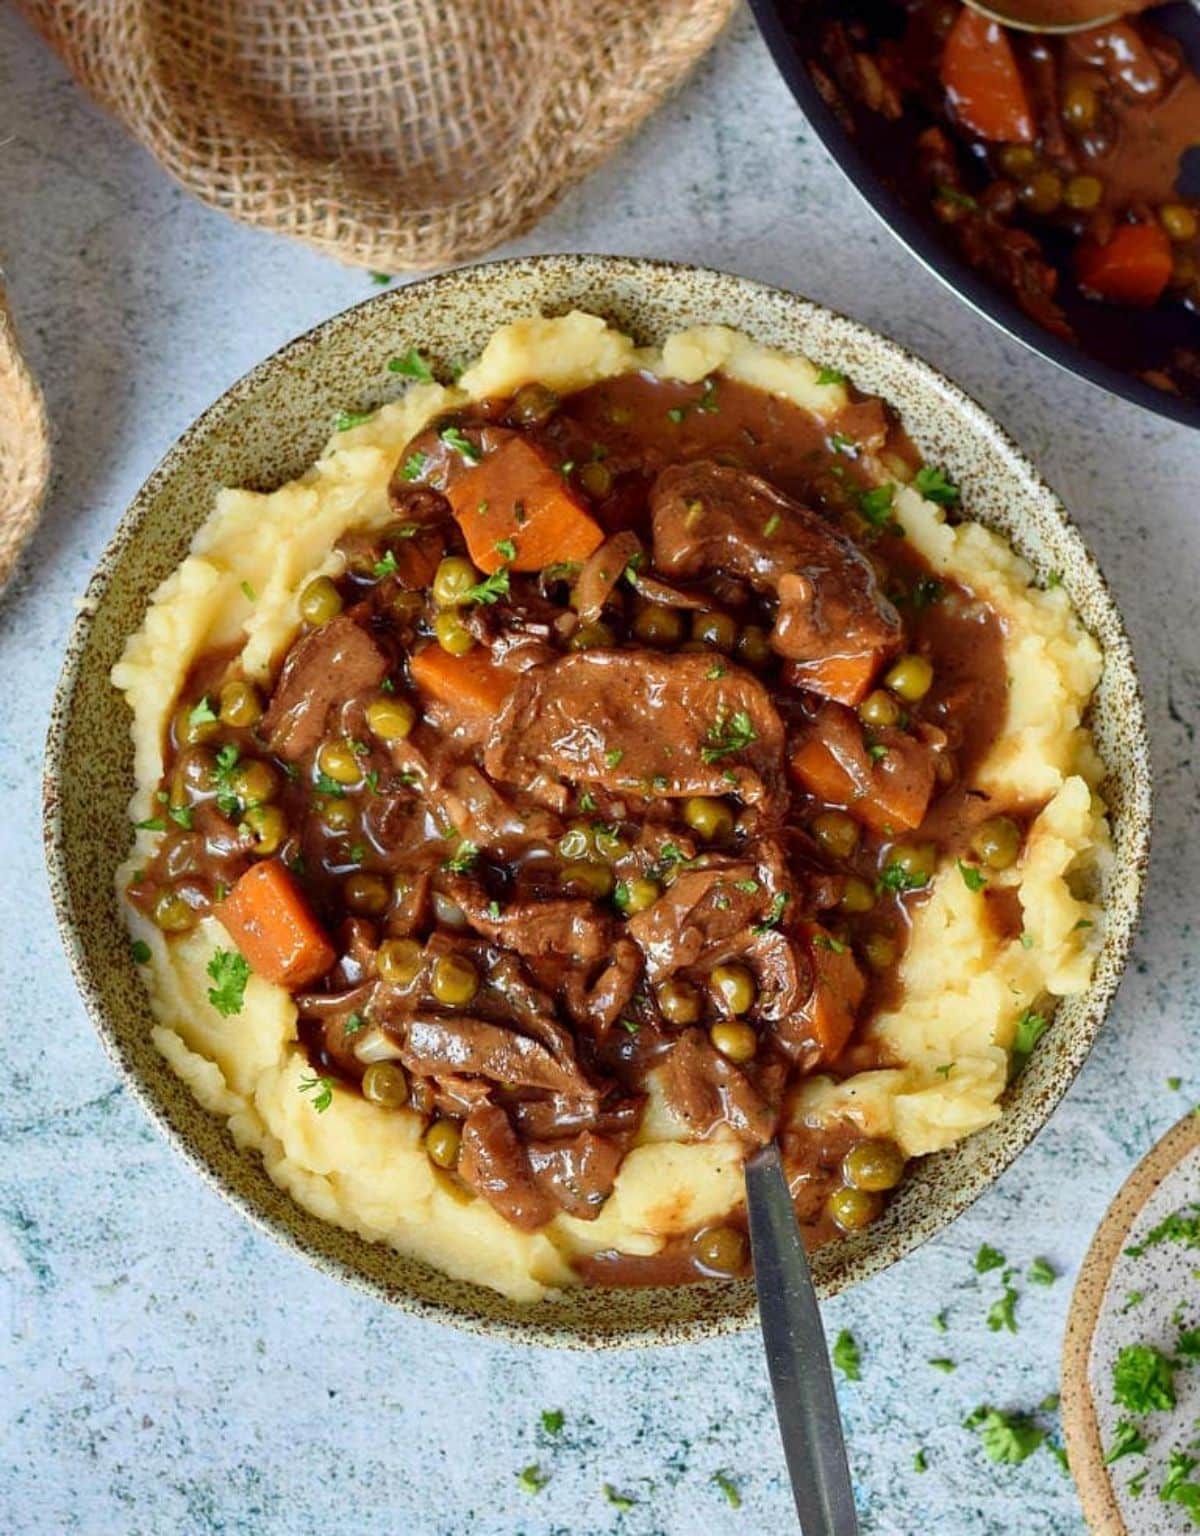 Mouth-watering mushroom bourguignon in a bowl.